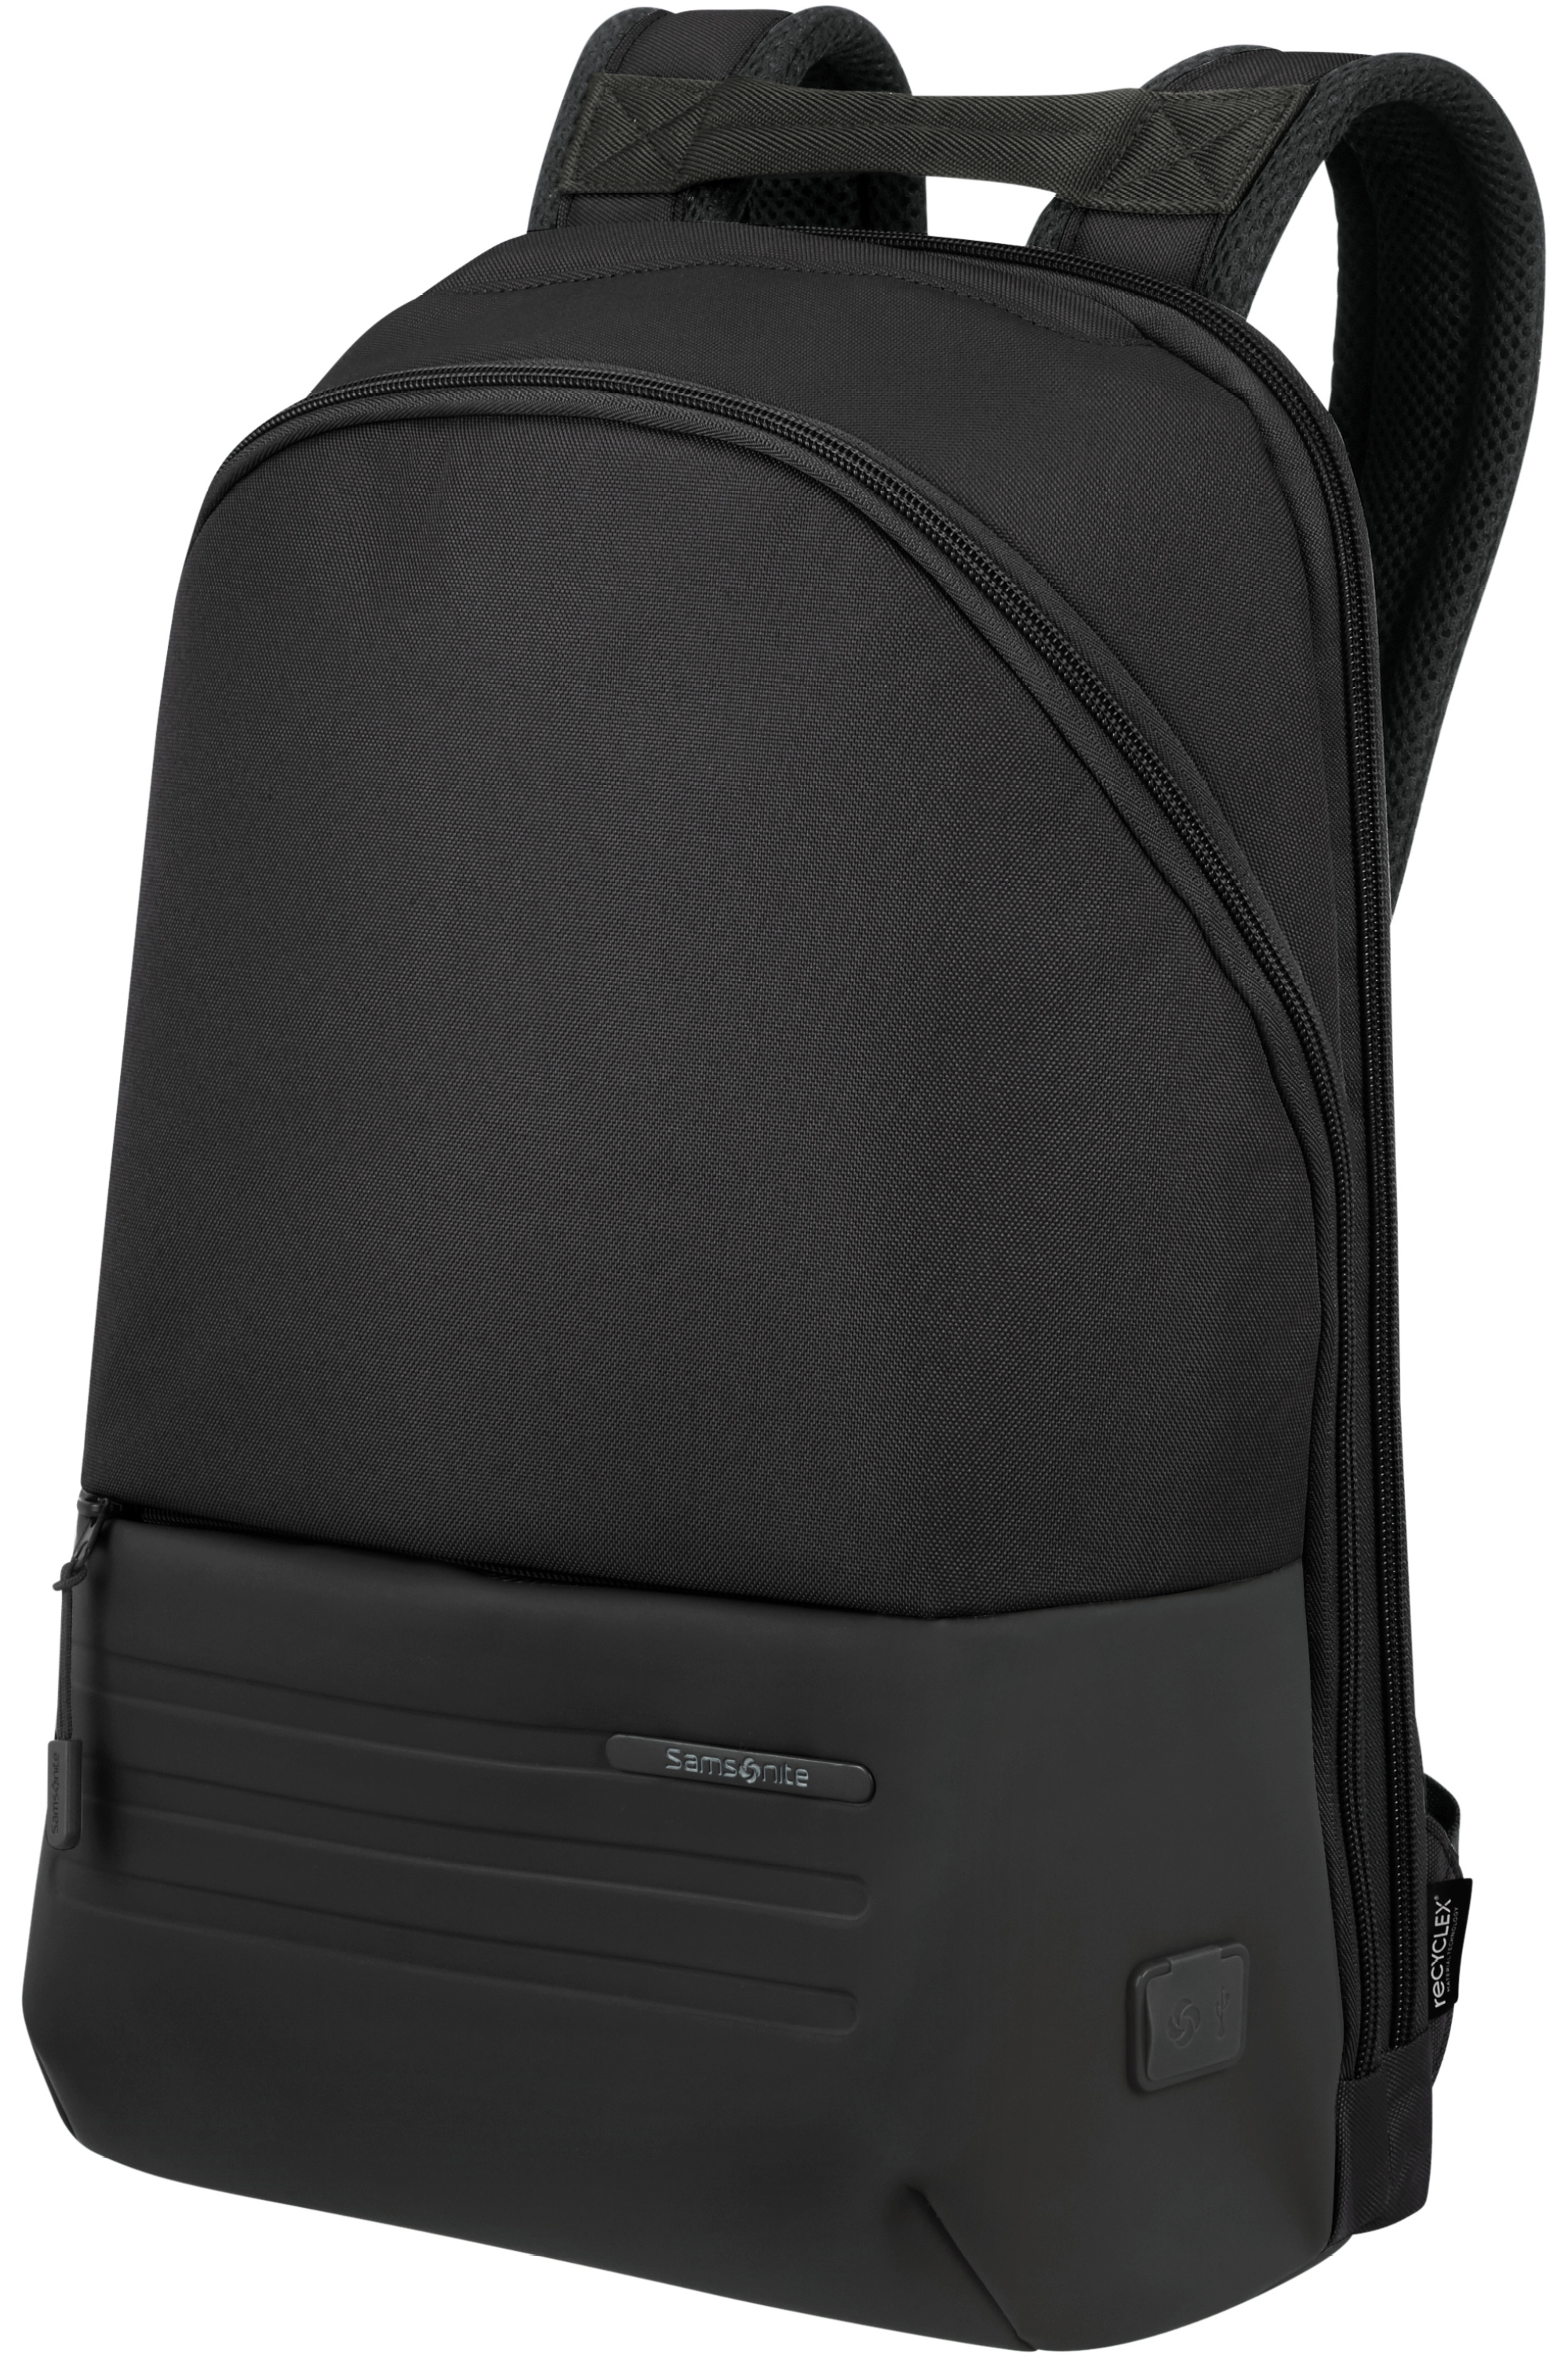 141470-1041-141470_1041_stackd_biz_laptop_backpack_14-1_front34-5e70054e-46b0-4c06-88ce-adb700bb1ce2-png